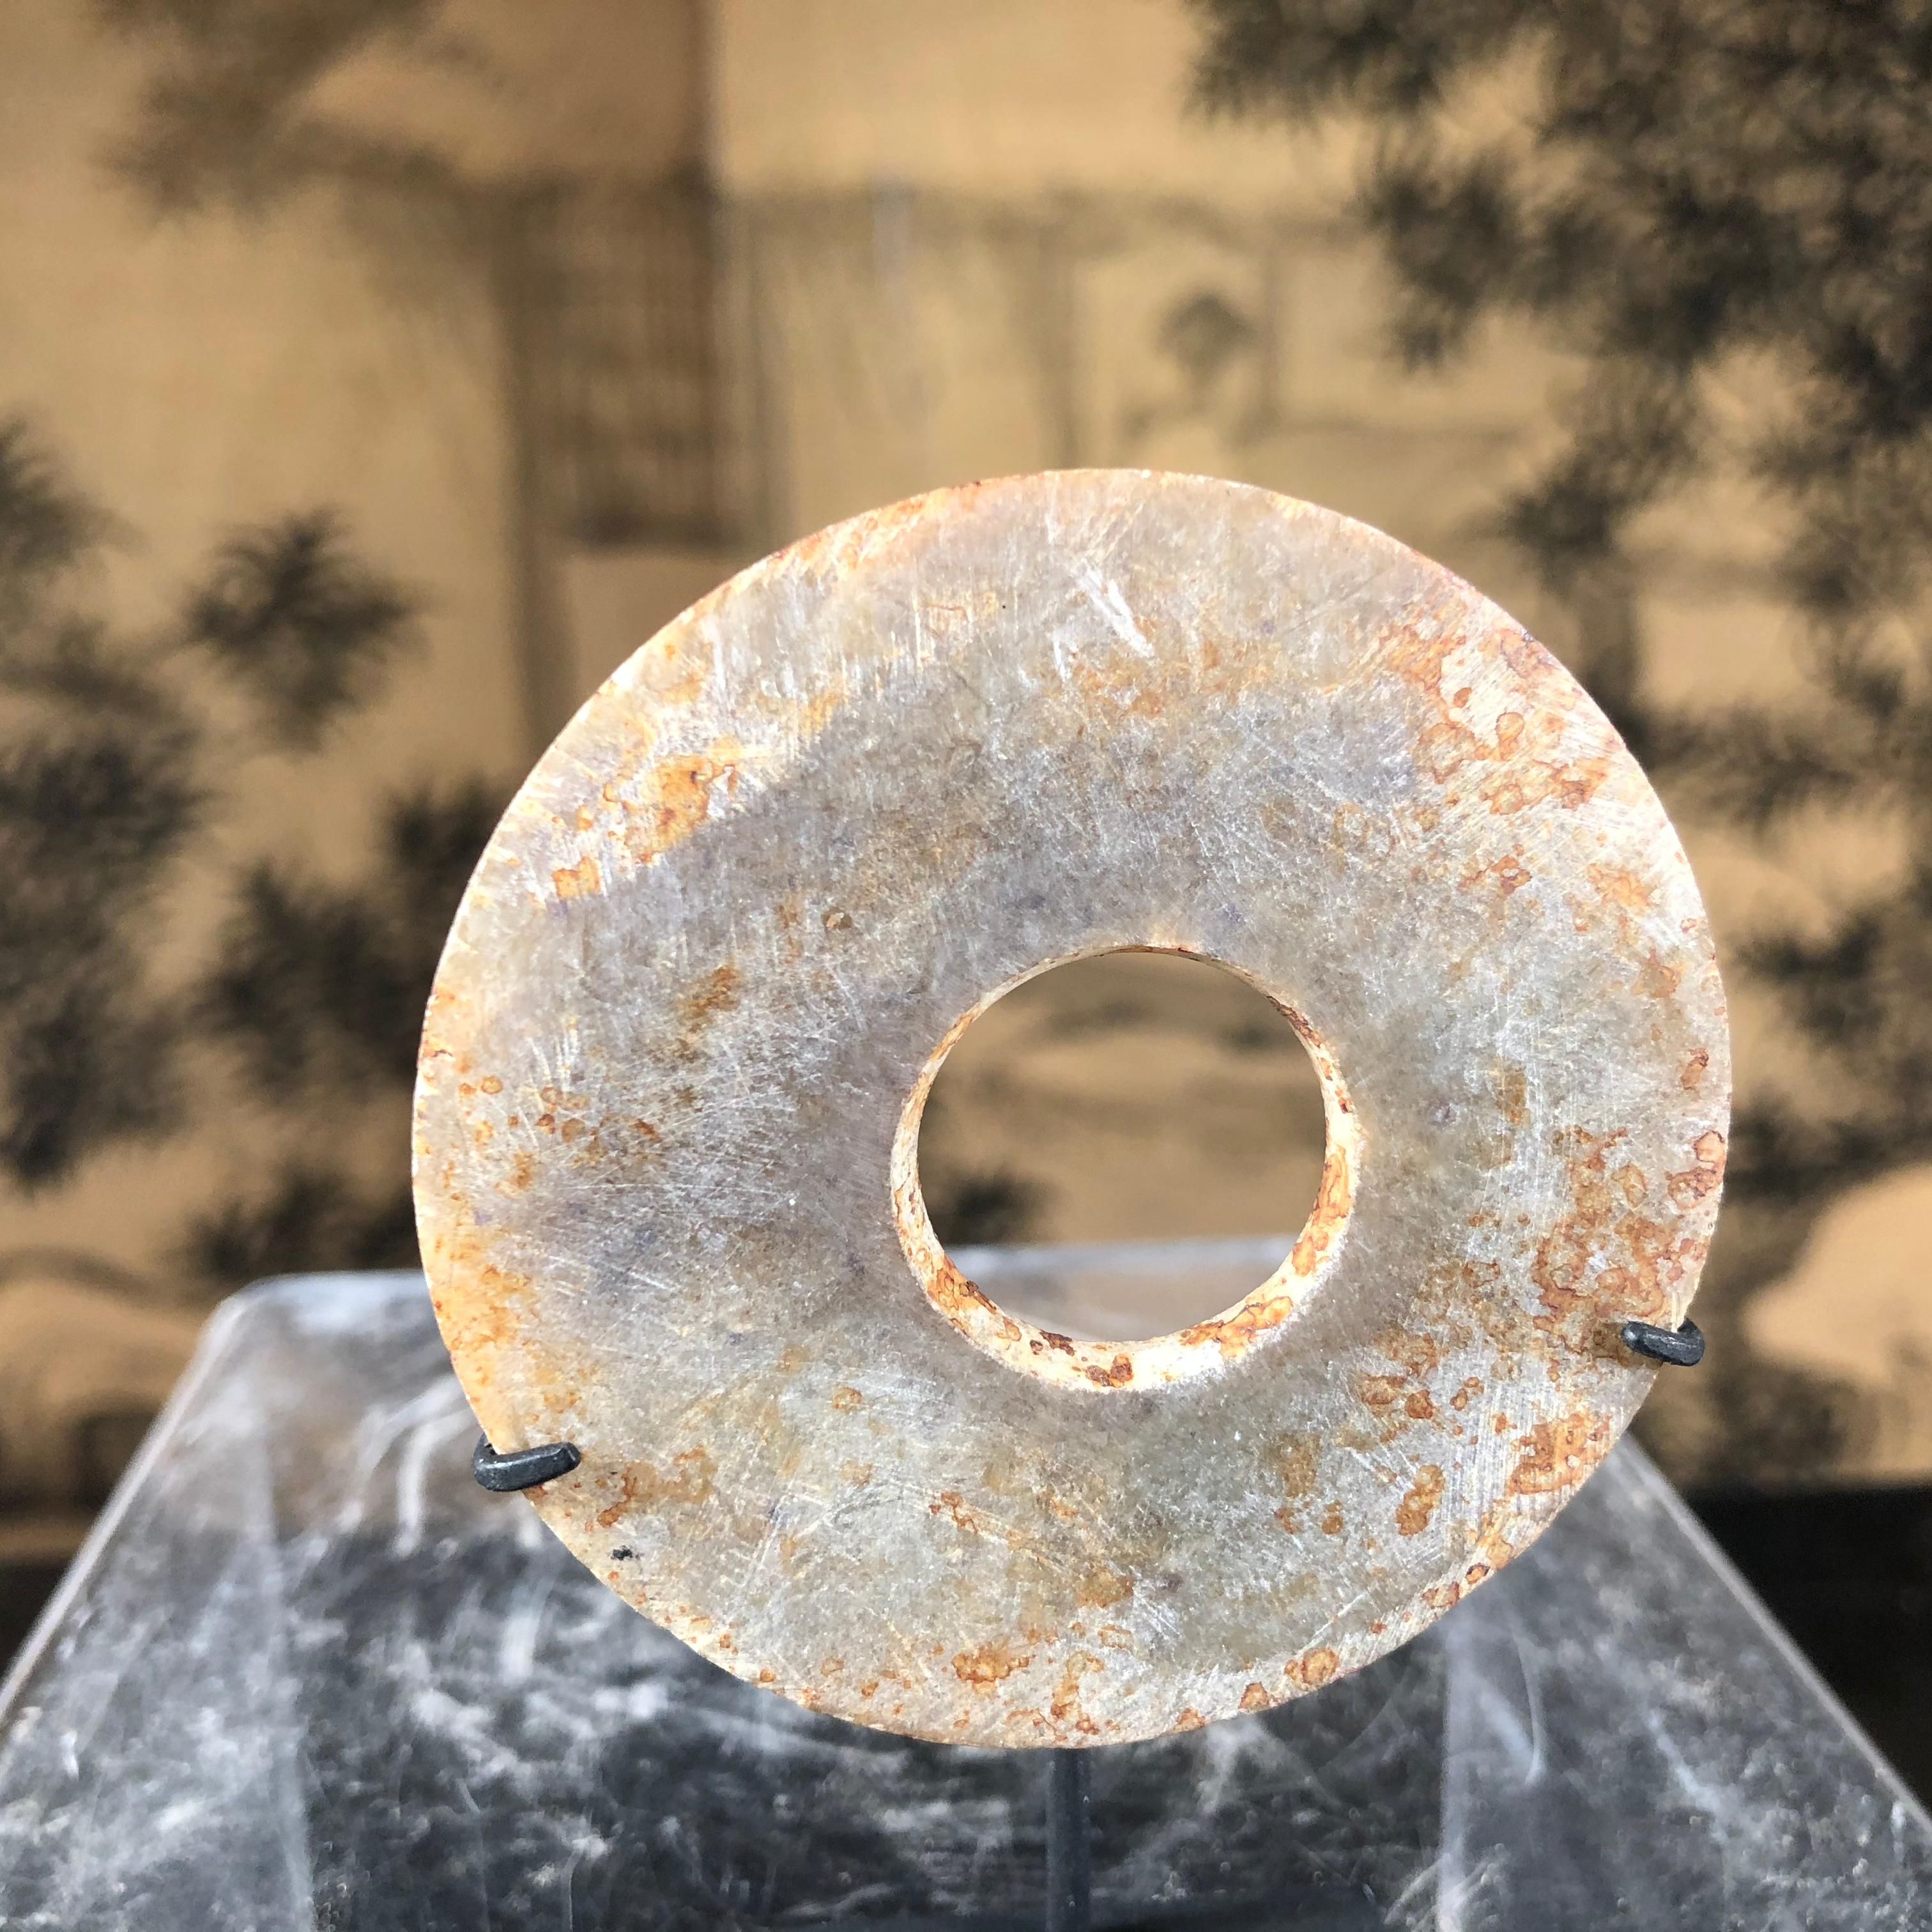 This is an authentic Chinese ancient jade bi disc from the Qi Jia Culture, Northwestern China, 3,000-2,000 BCE. This comes from our private collection. 

Including Our Certificate of Authenticity

This is a lovely example. It could also make an